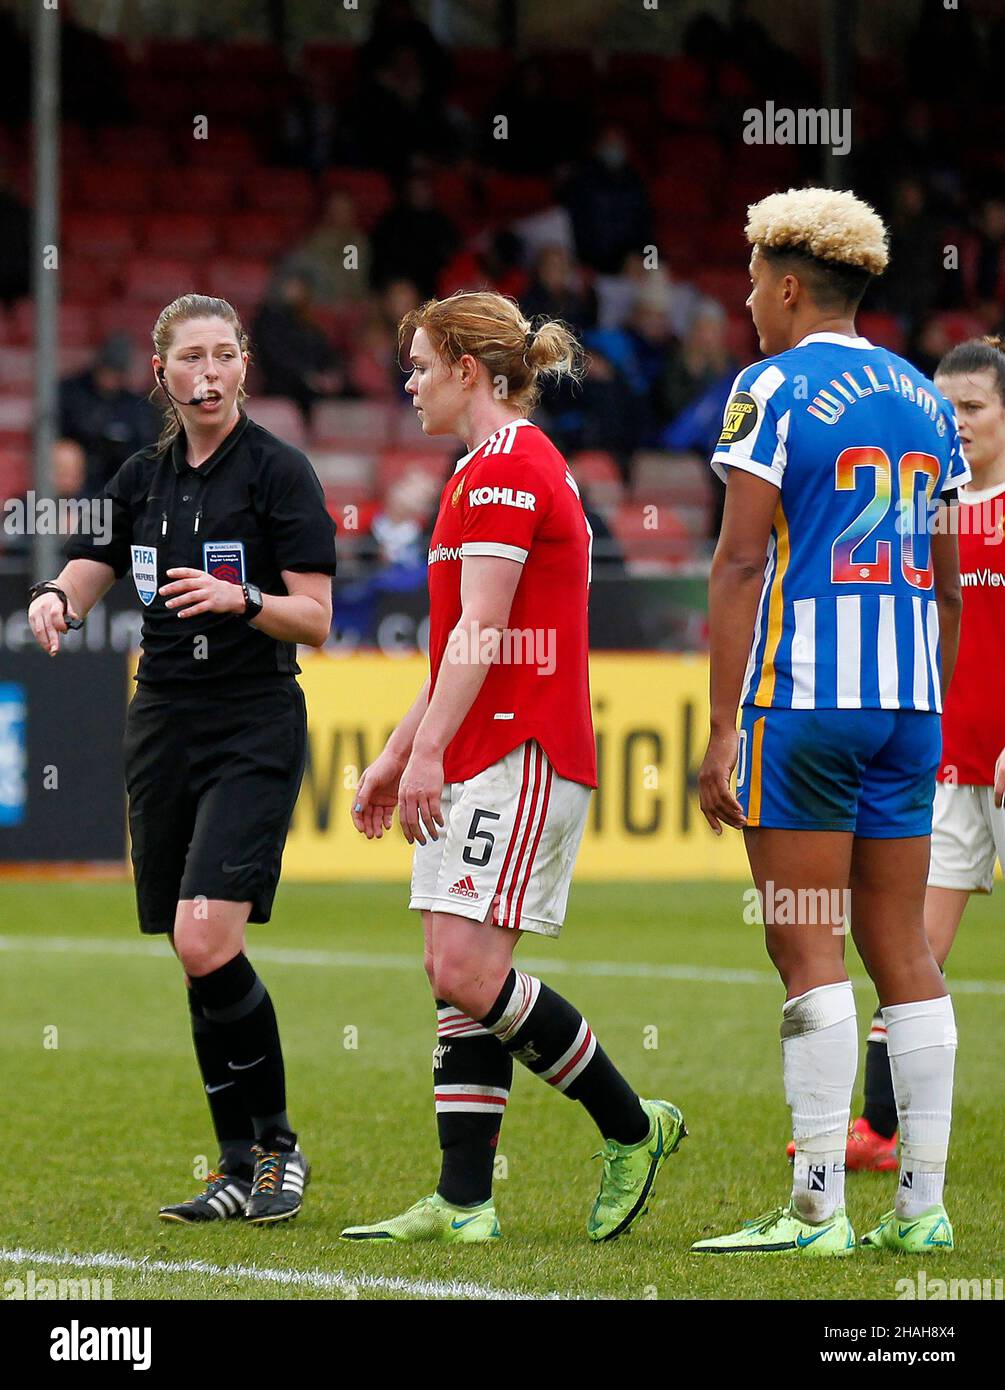 CRAWLEY, United Kingdom, DECEMBER 12: Referee, Abigail Byrne speaks to Aoife Mannion of Manchester United Women and Megan Connolly of Brighton & Hove Stock Photo